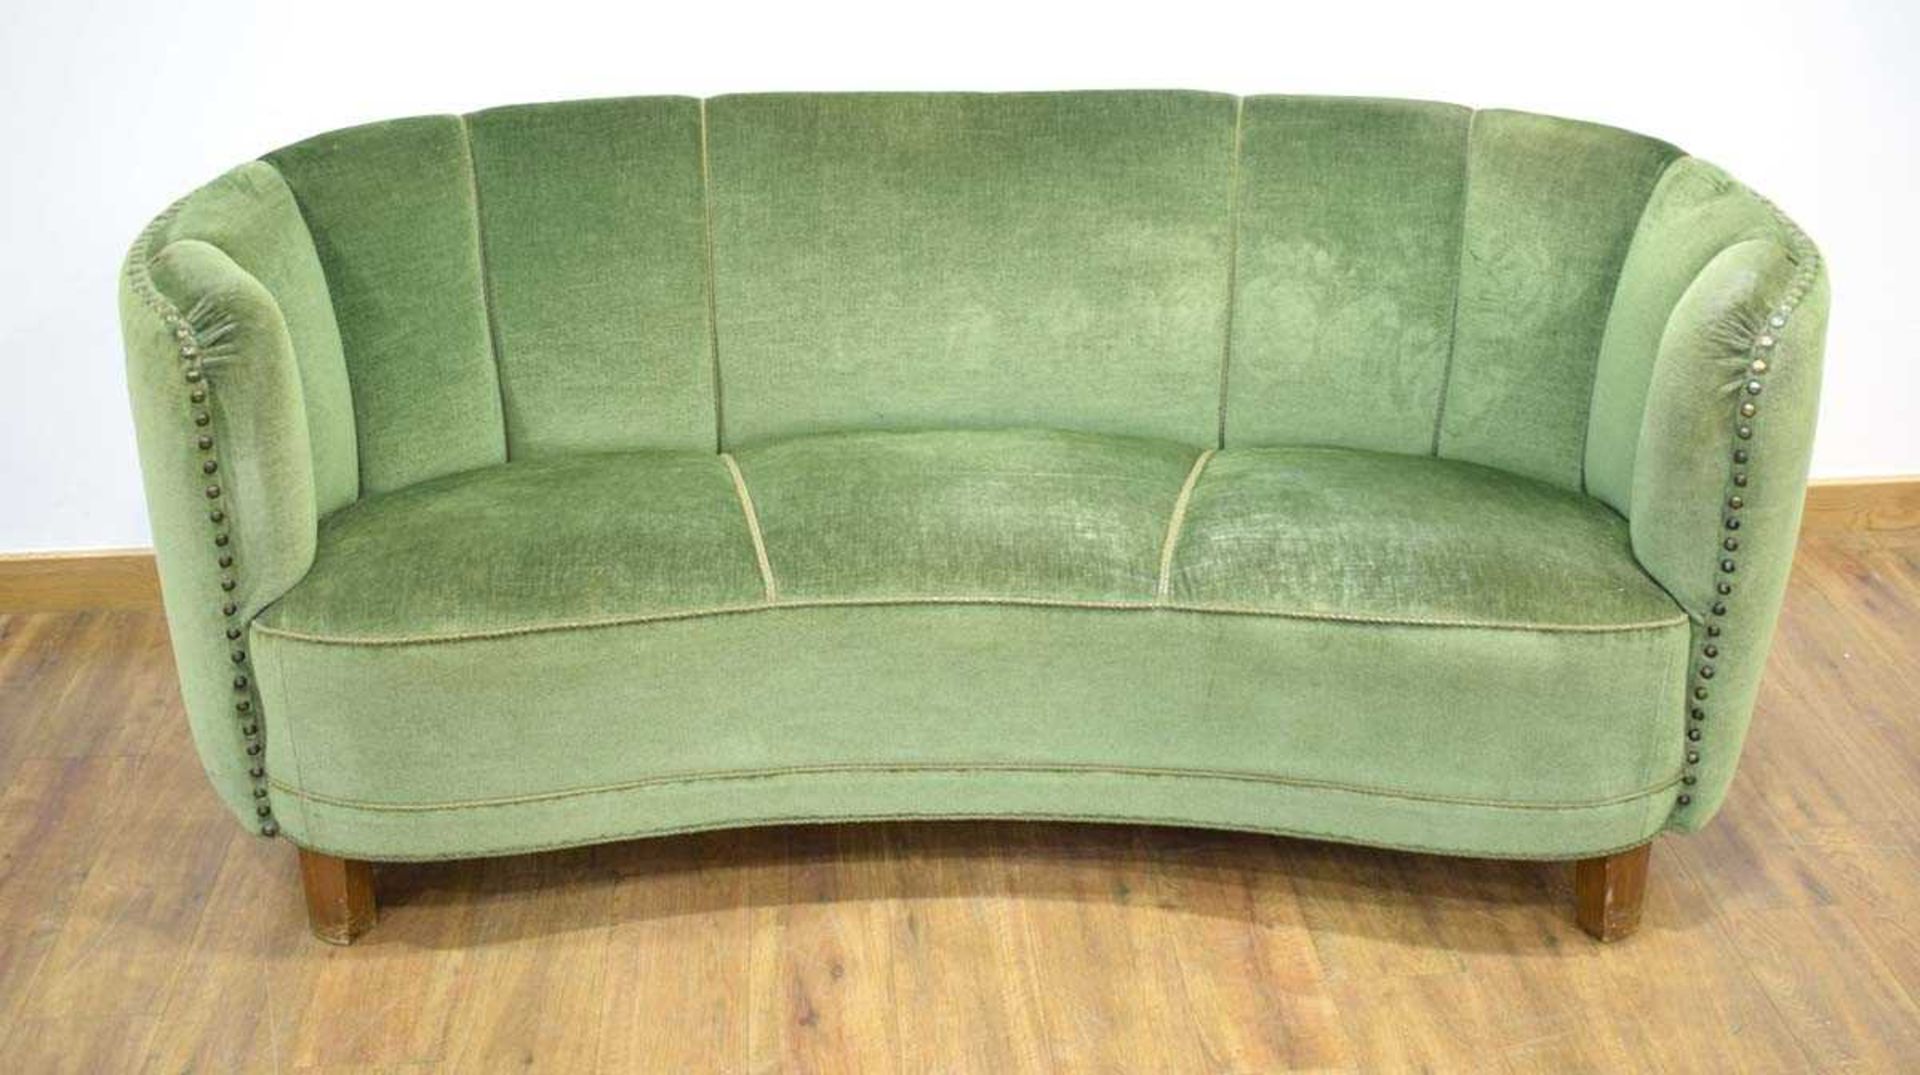 A 1940/50's Danish 'Banana' sofa upholstered in green on mahogany block feet *Sold subject to our - Image 2 of 27